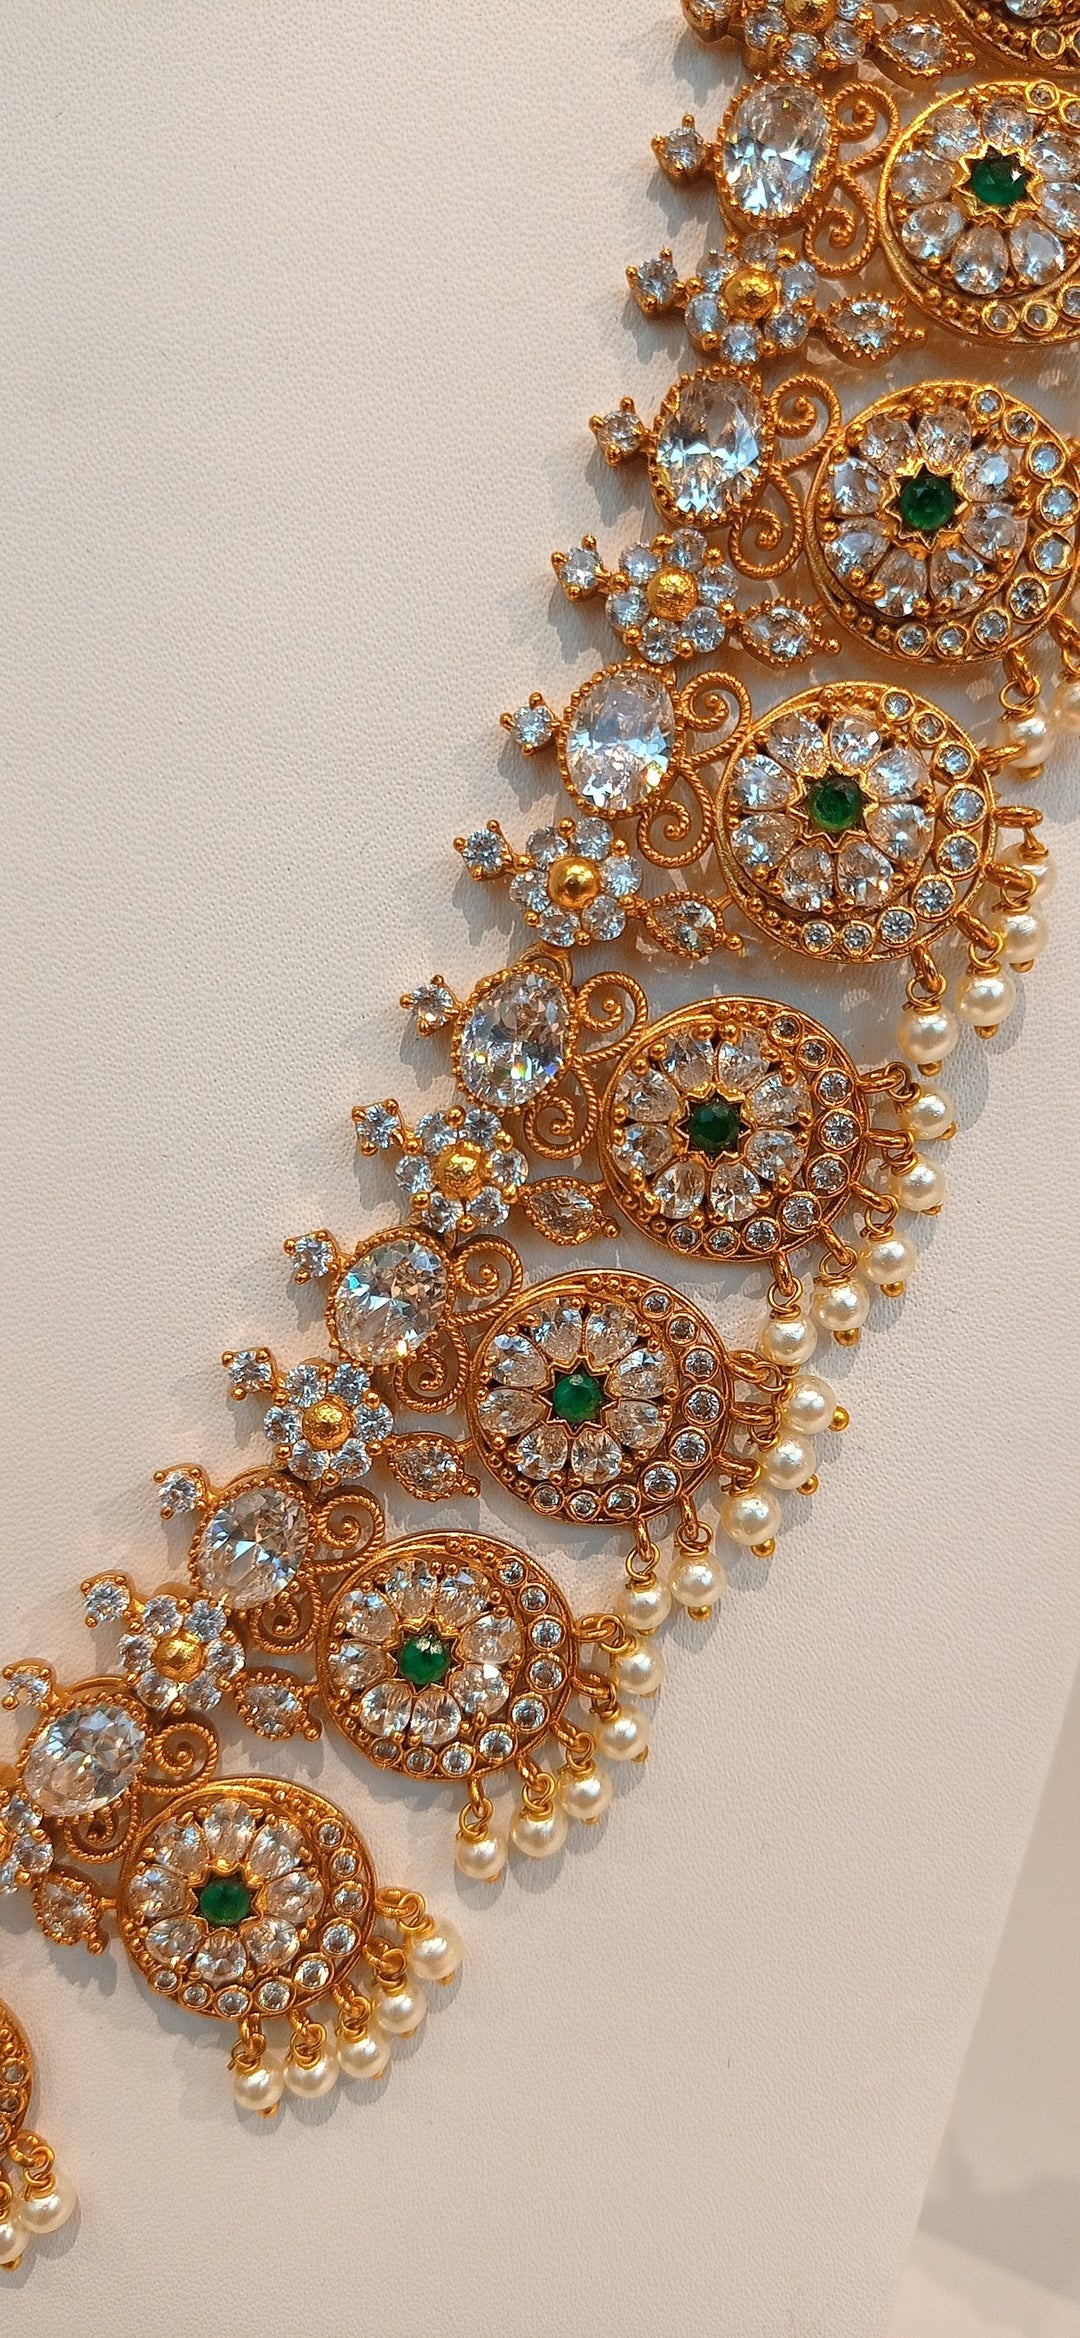 Subhabya Delicate Gold and Emerald Long Necklace and Earrings Set